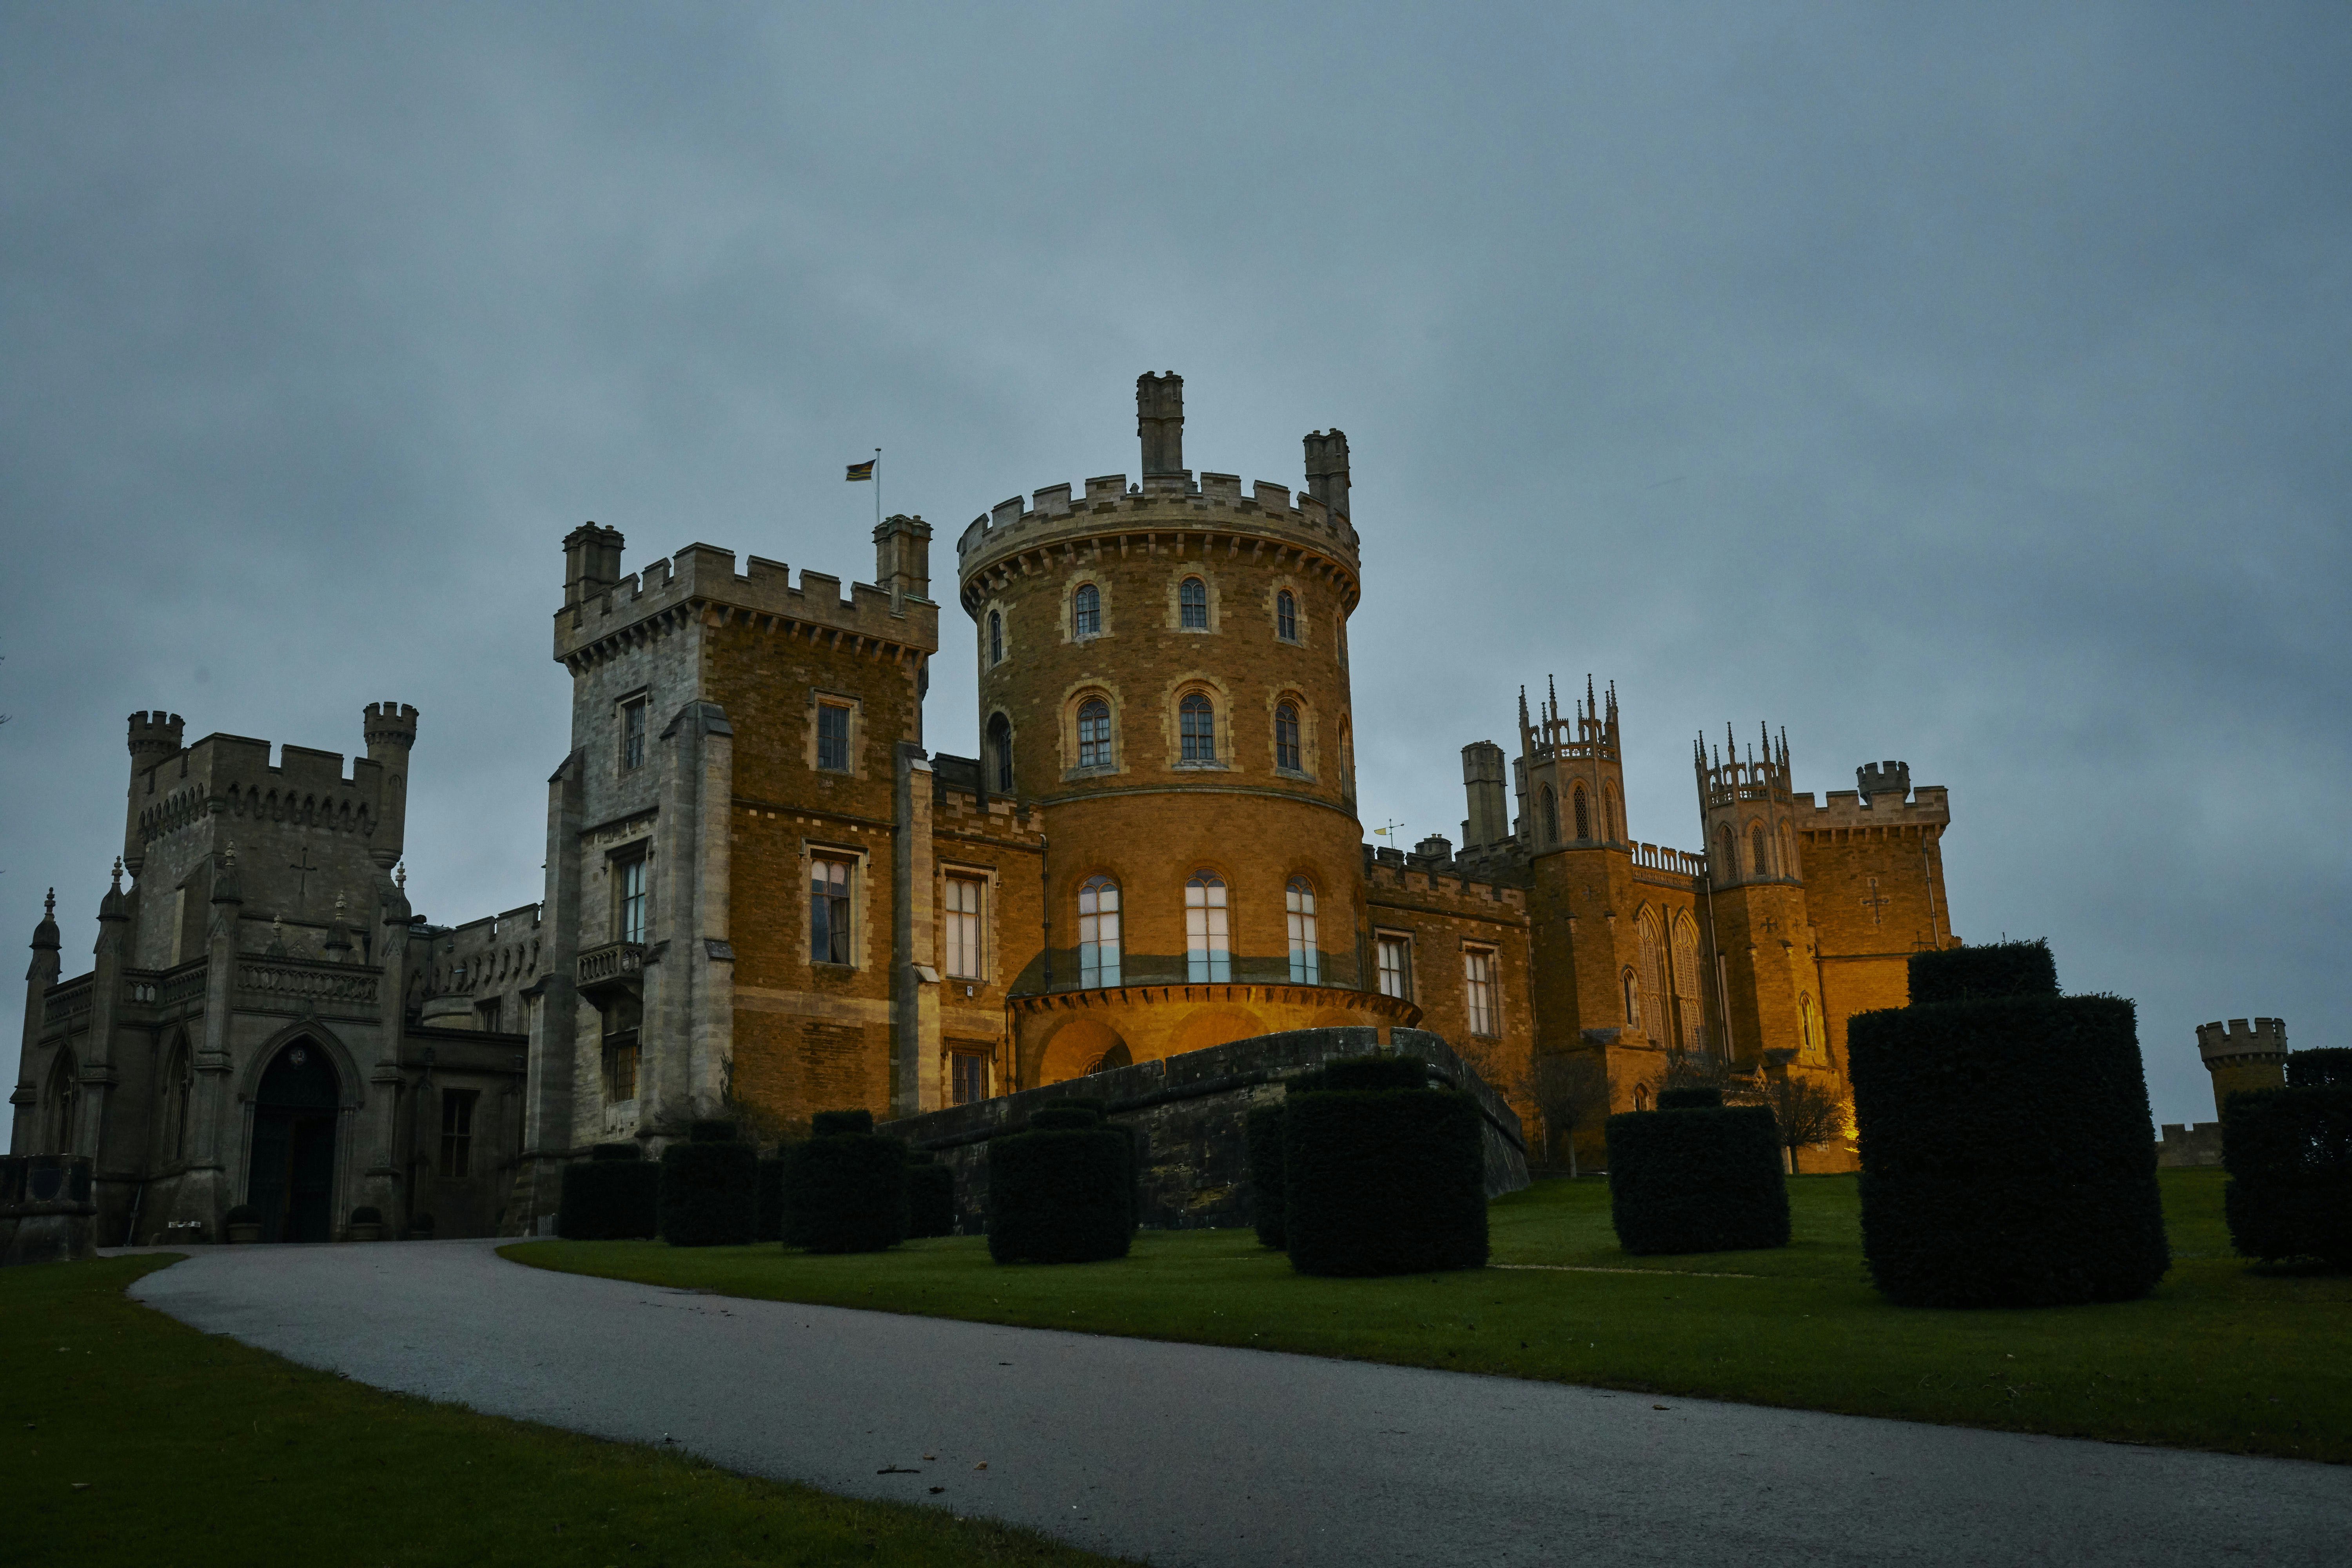 A view of Belvoir Castle at night